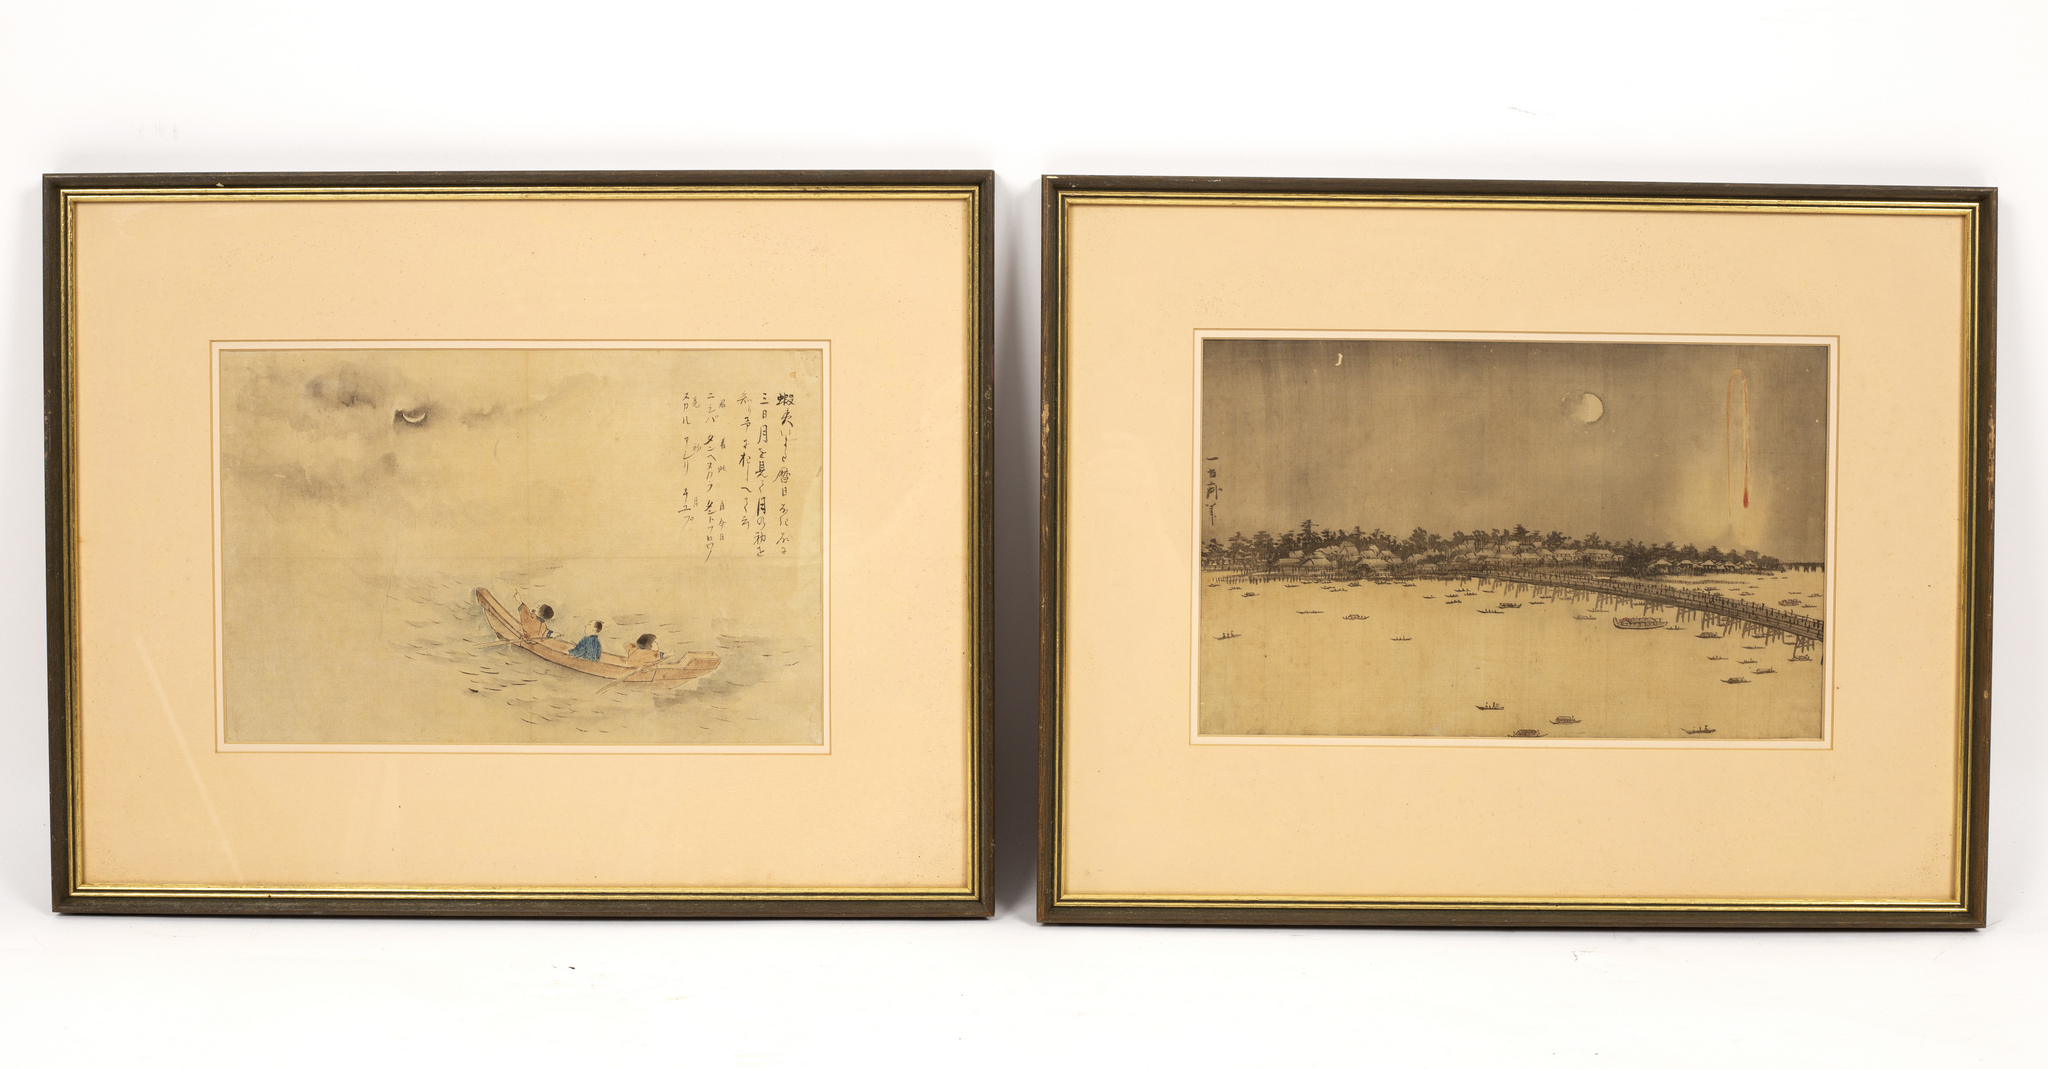 Late 19th Century Japanese School/Three Men in a Boat/one pointing at the moon/pen and ink wash, 21.